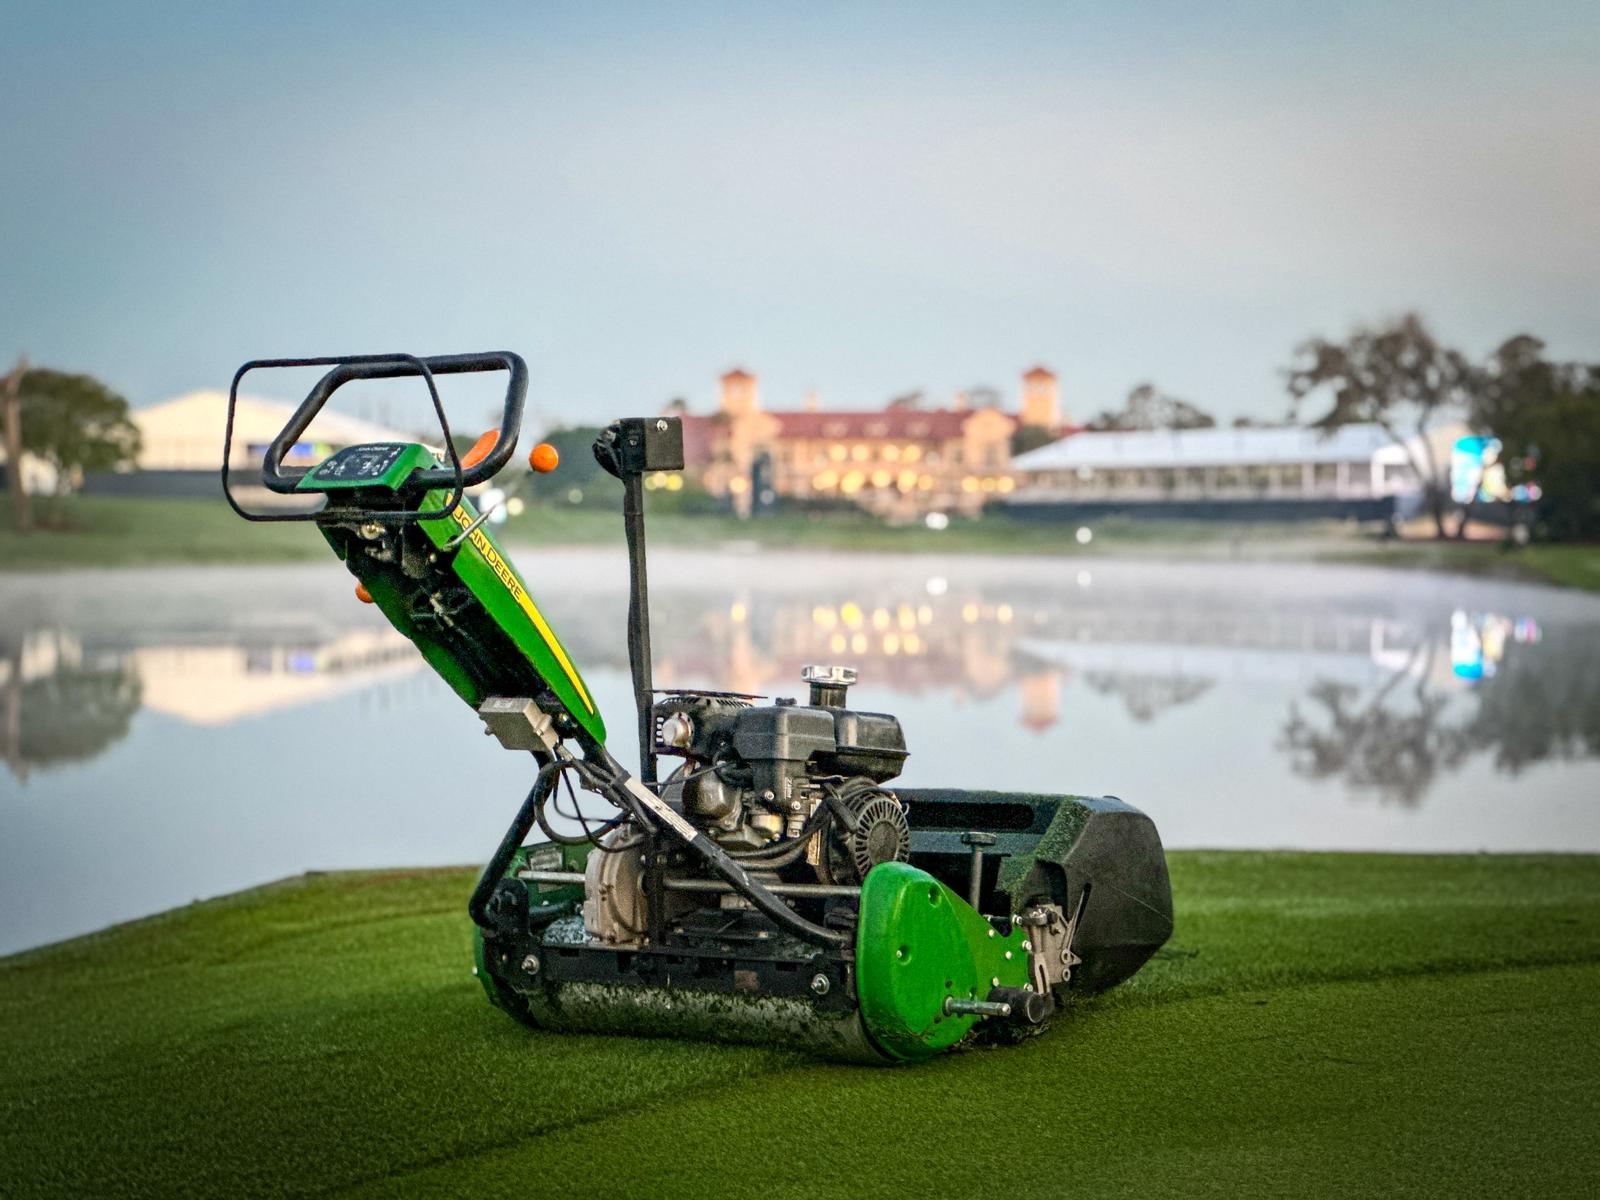 A John Deere push mower on the 18th tee at TPC Sawgrass by Alex Brougham